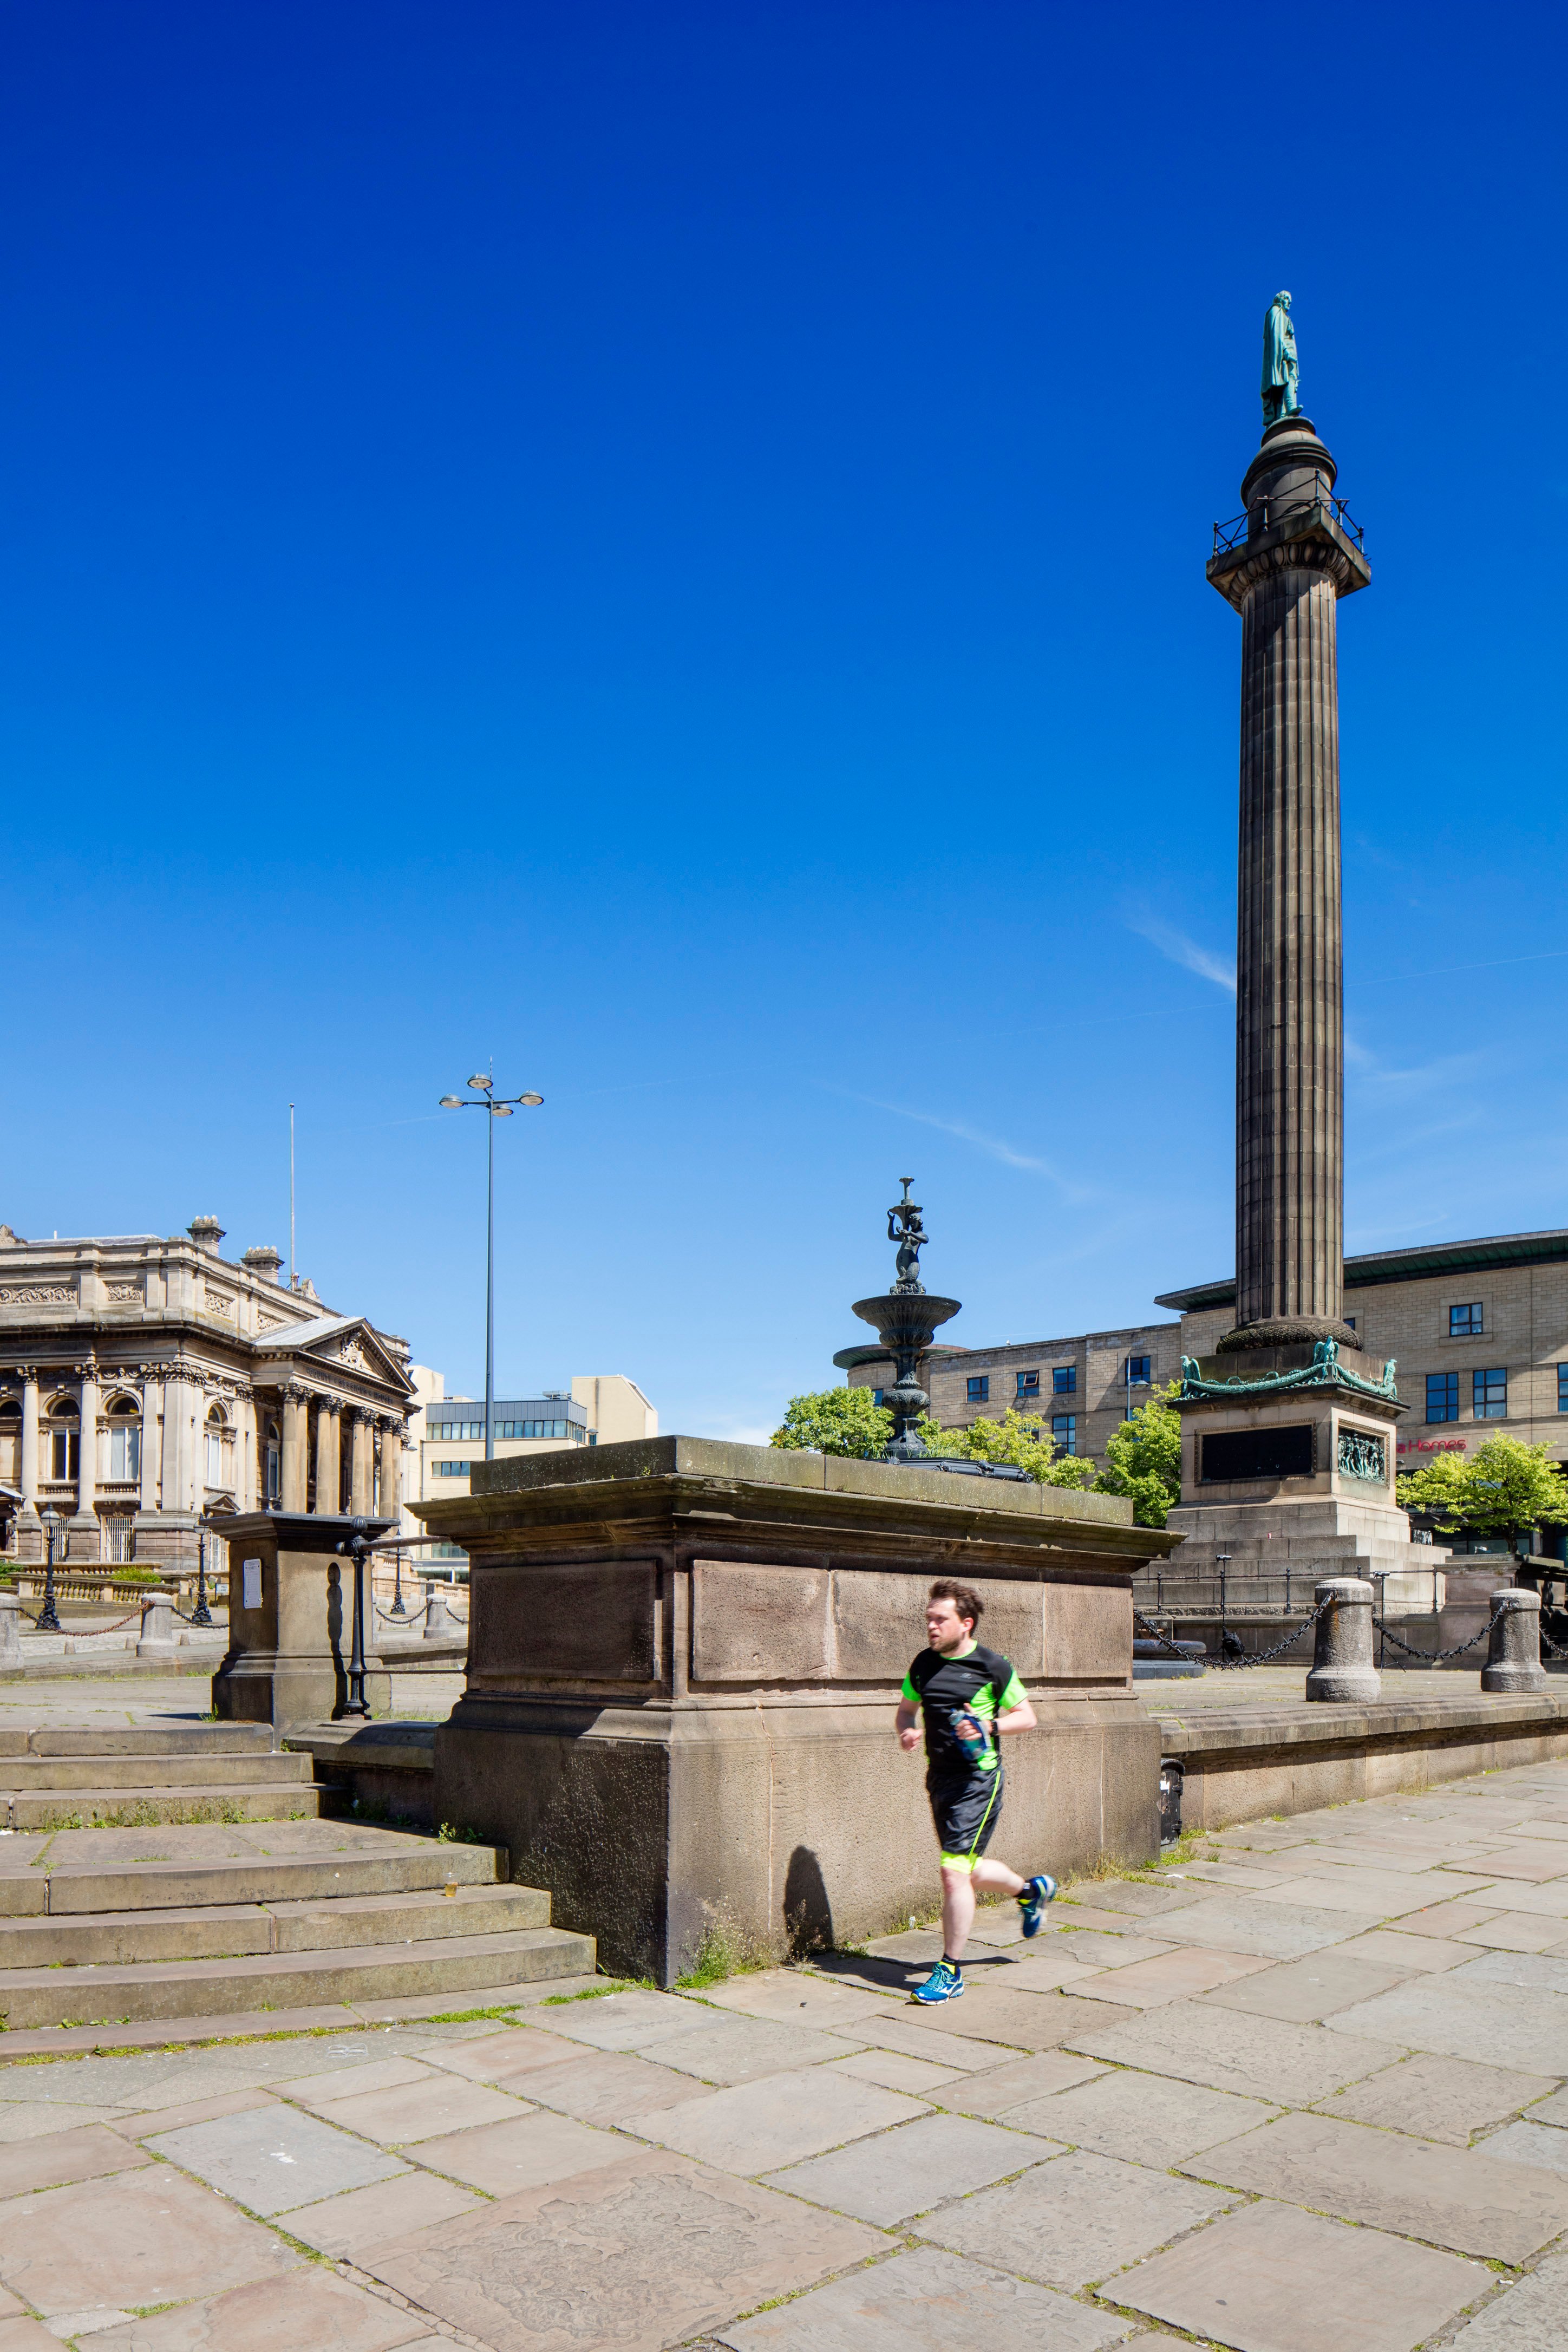 Photograph of the Wellington Column, Liverpool, with a jogger running past its base.